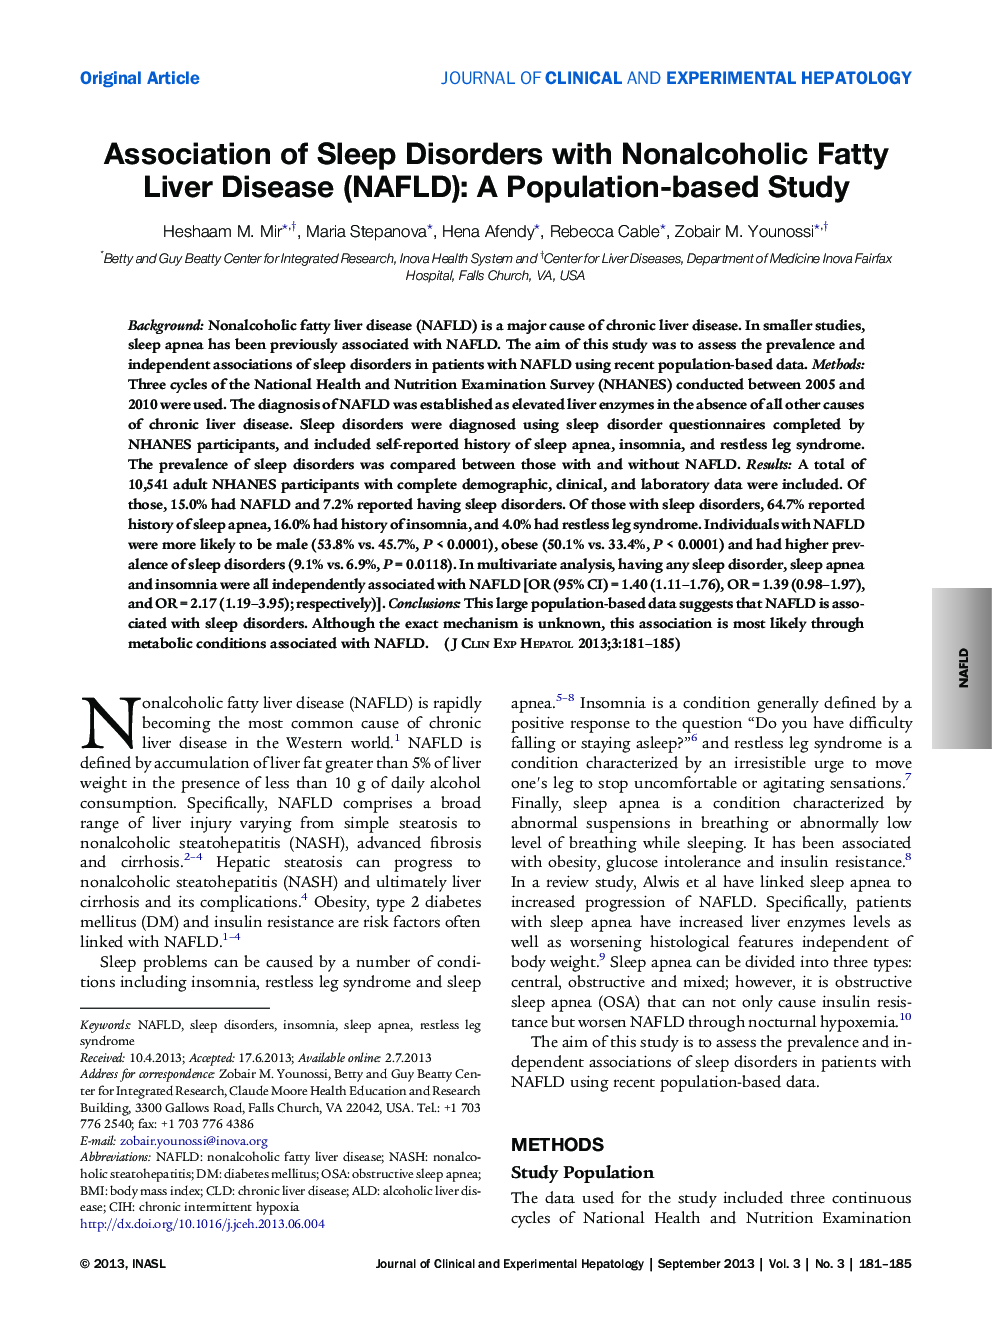 Association of Sleep Disorders with Nonalcoholic Fatty Liver Disease (NAFLD): A Population-based Study